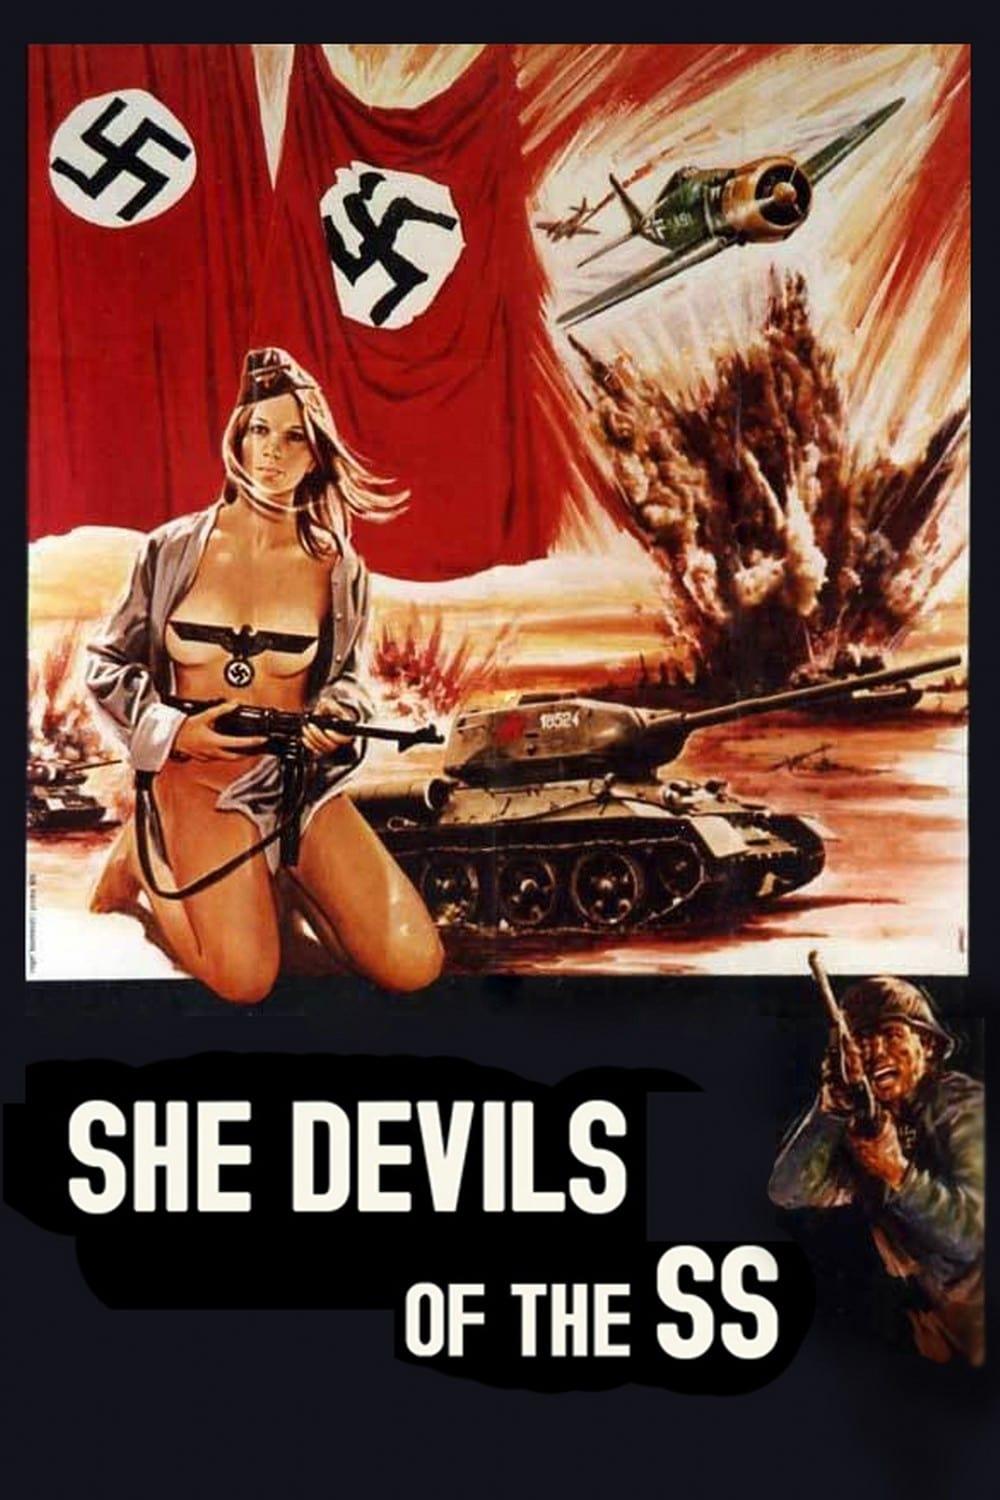 She Devils of the SS poster